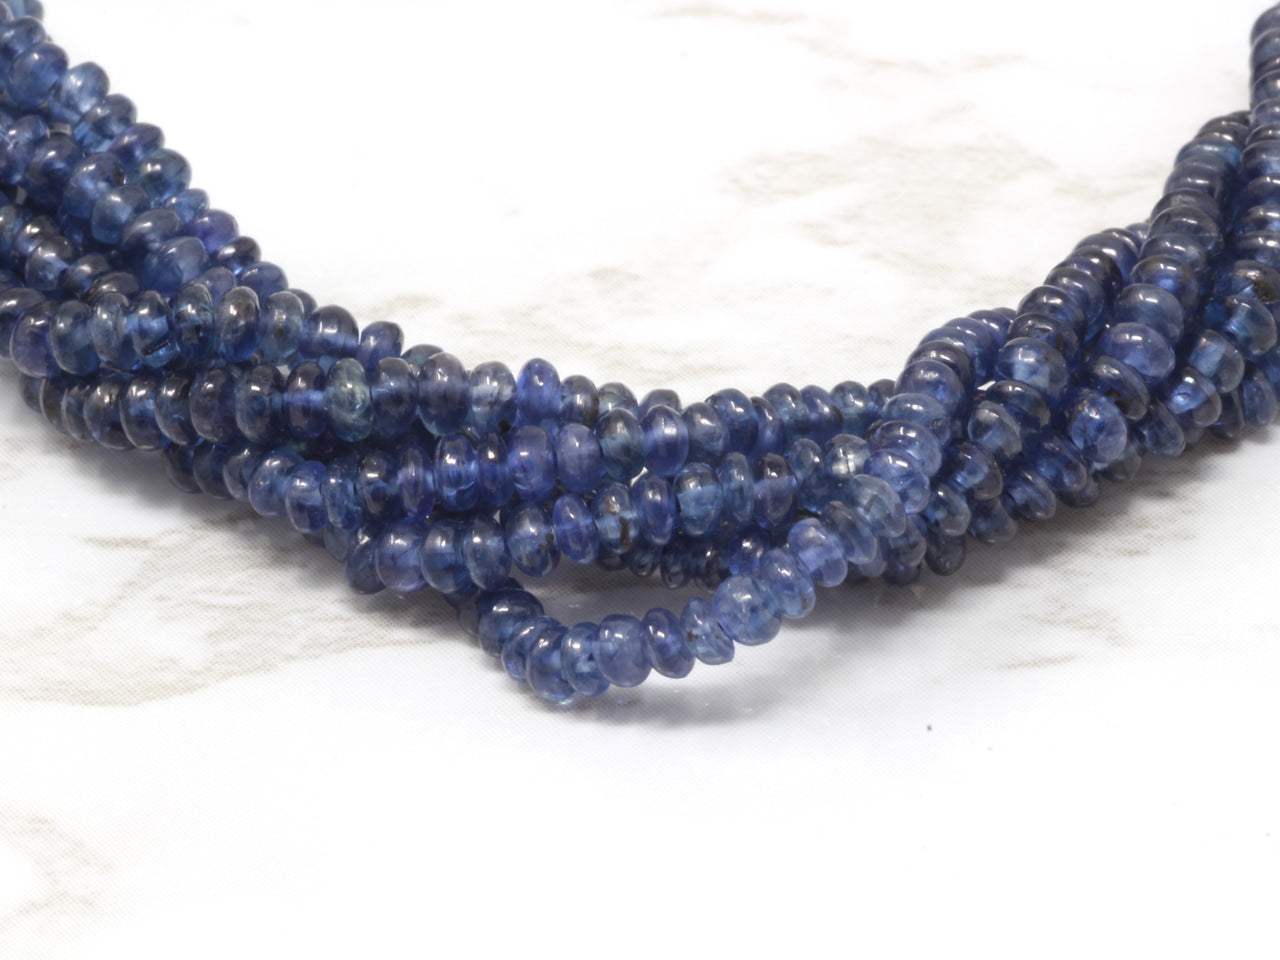 Navy Blue Sapphire 2.5mm Smooth Rondelles Bead Strand